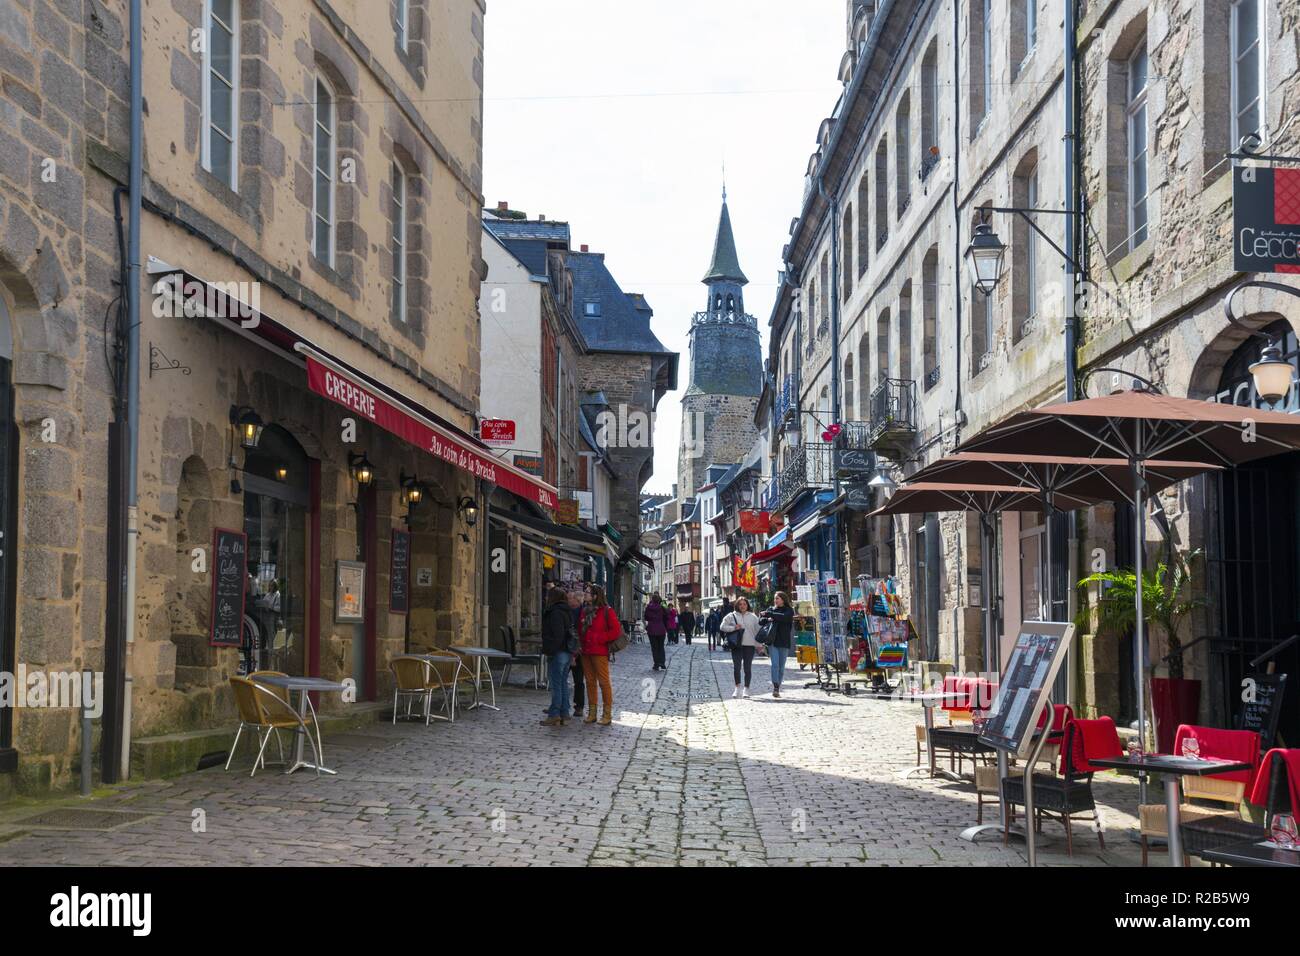 DINAN, FRANCE - APRIL 6, 2018: beautiful streets with colombage houses in the famous city of Dinan. Normandy, France Stock Photo